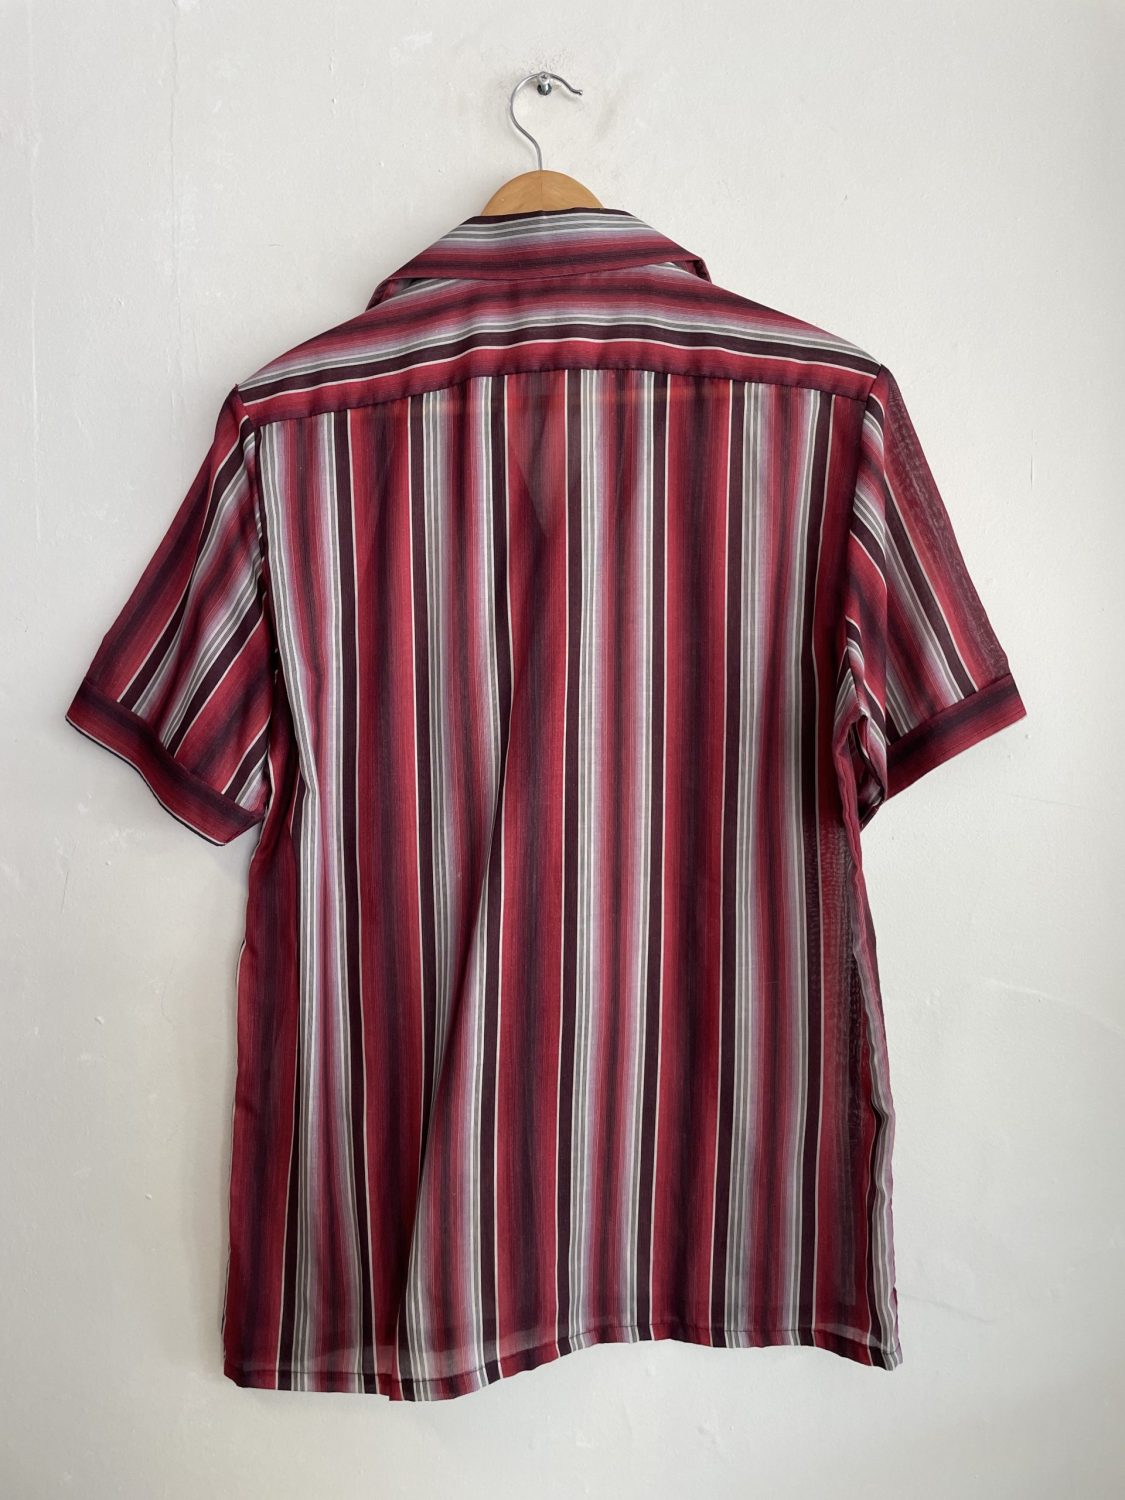 70's SHADES OF RED STRIPED S/S 'HOSMA' SHIRT | Chaos Bazaar Vintage